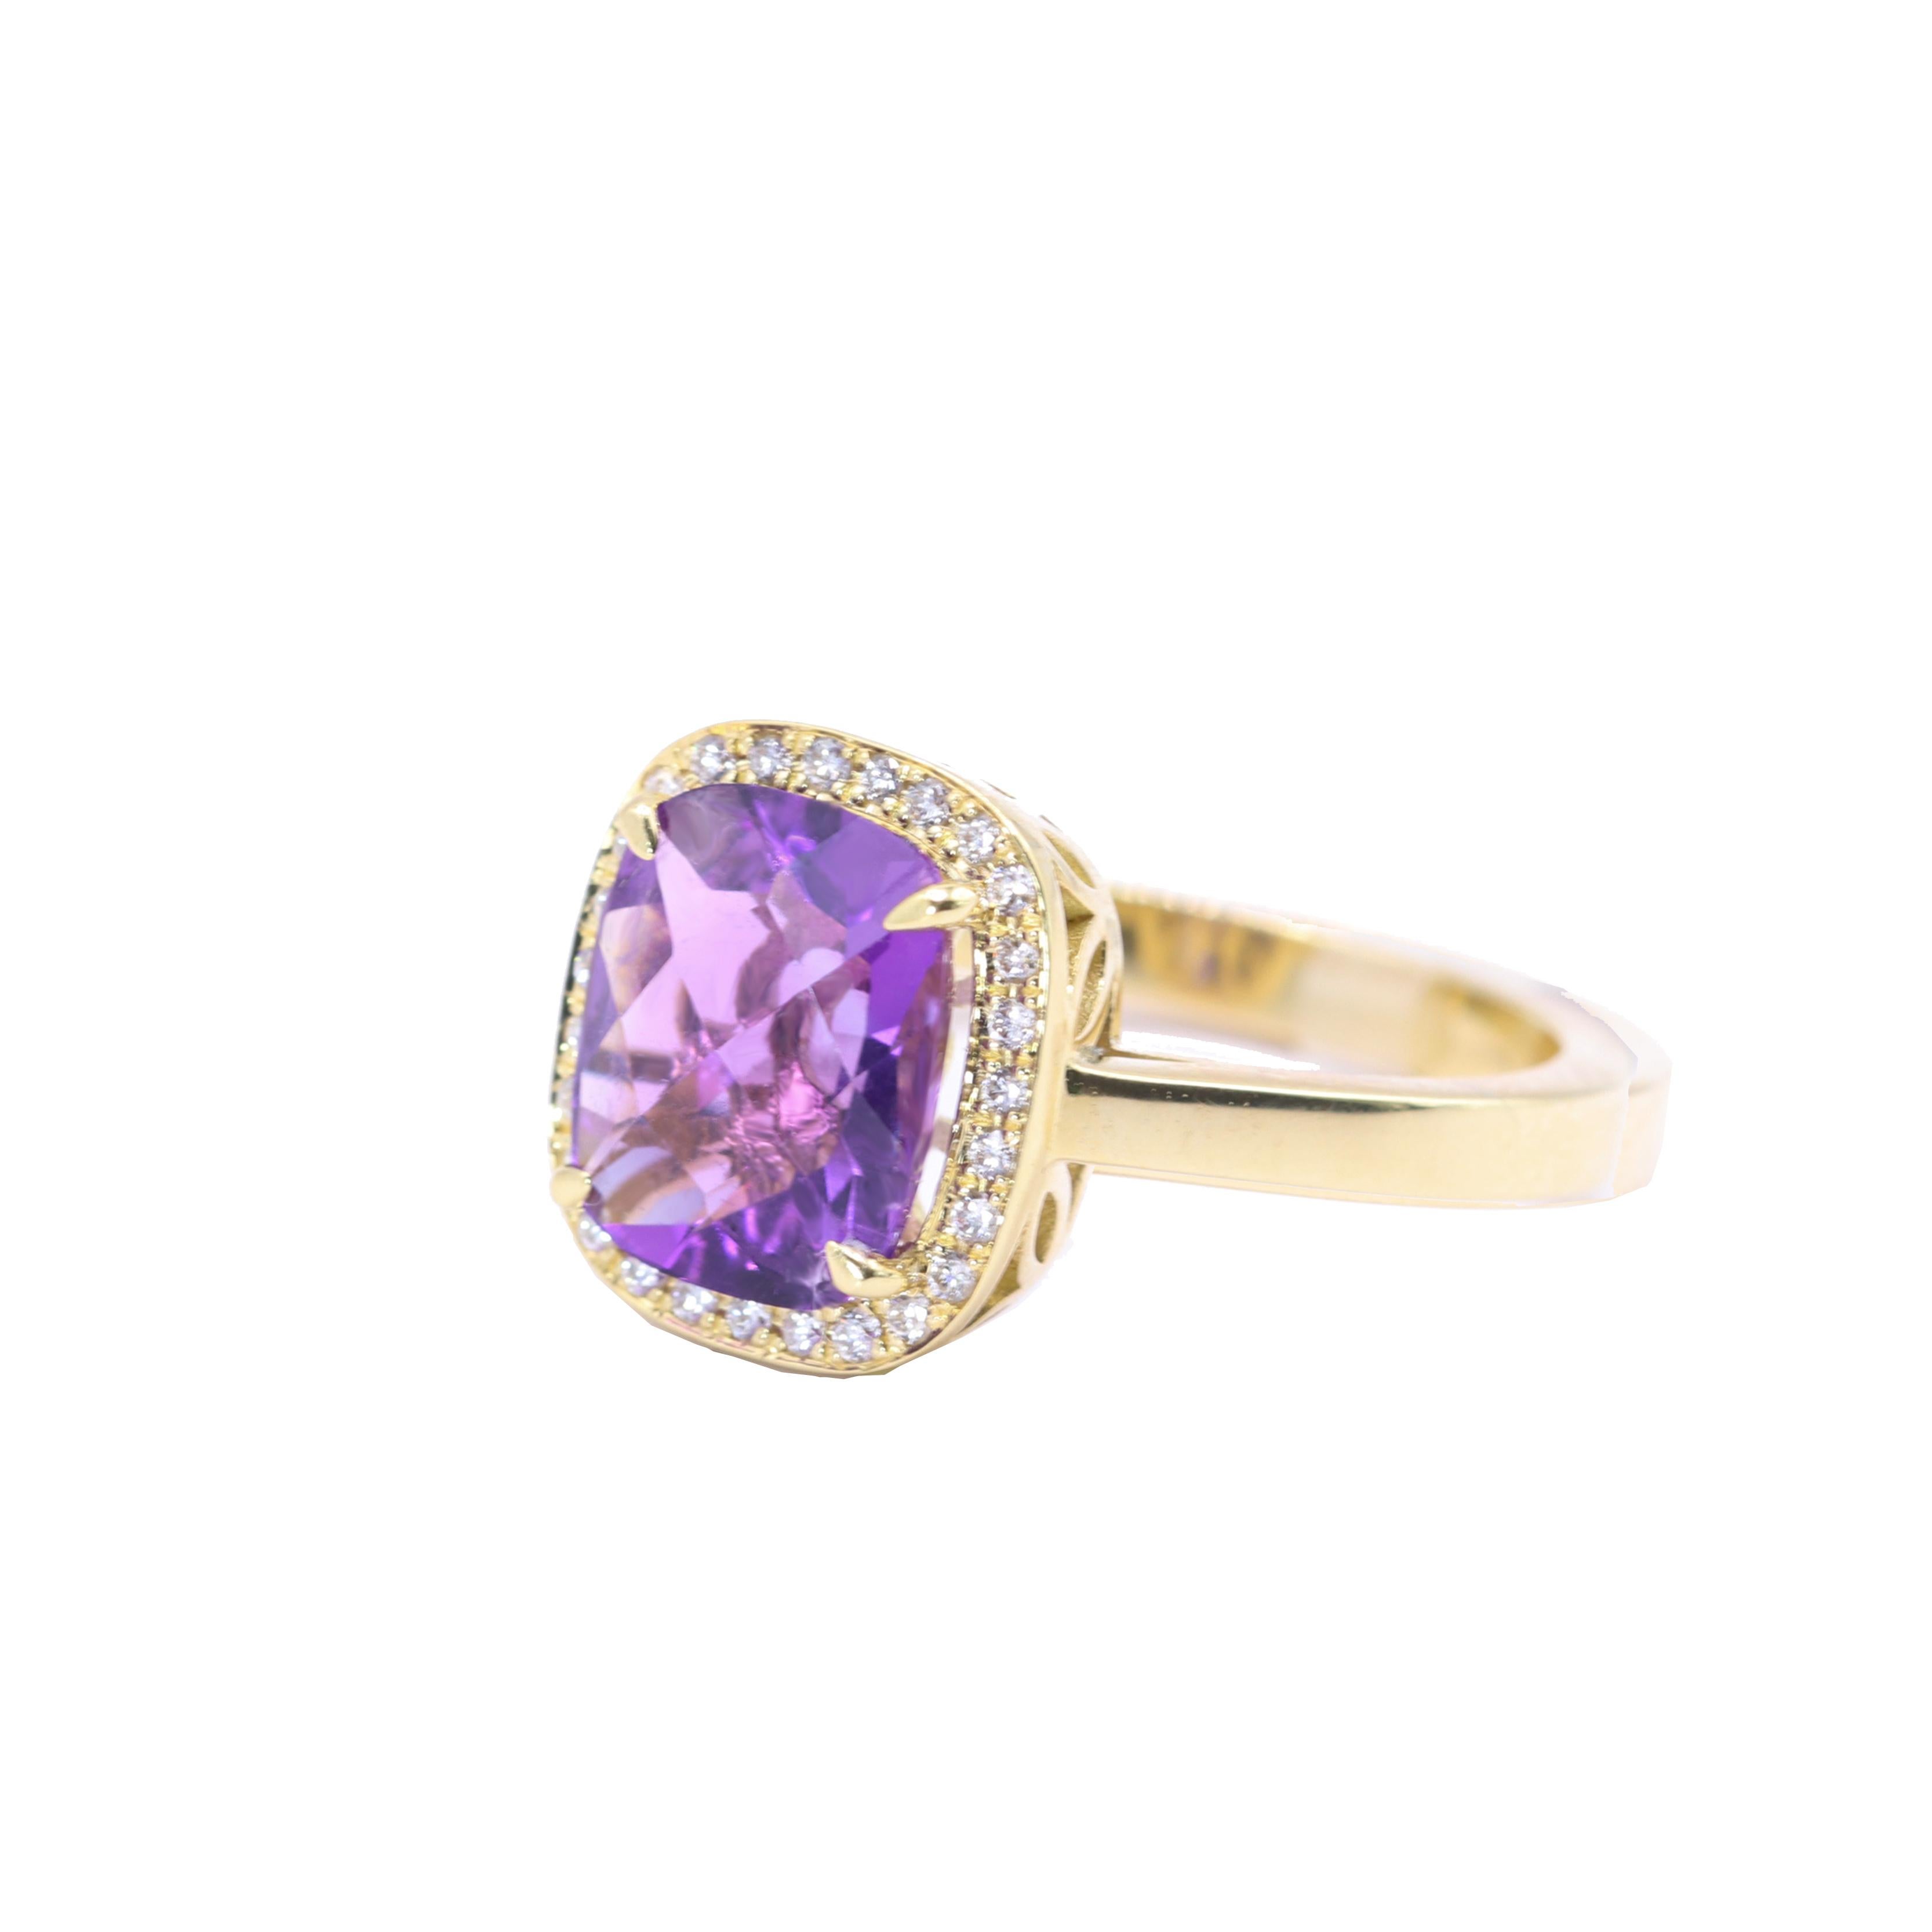 Georgios Collections 18 Karat Yellow Gold Amethyst Ring with Diamond Bezel In New Condition For Sale In Astoria, NY